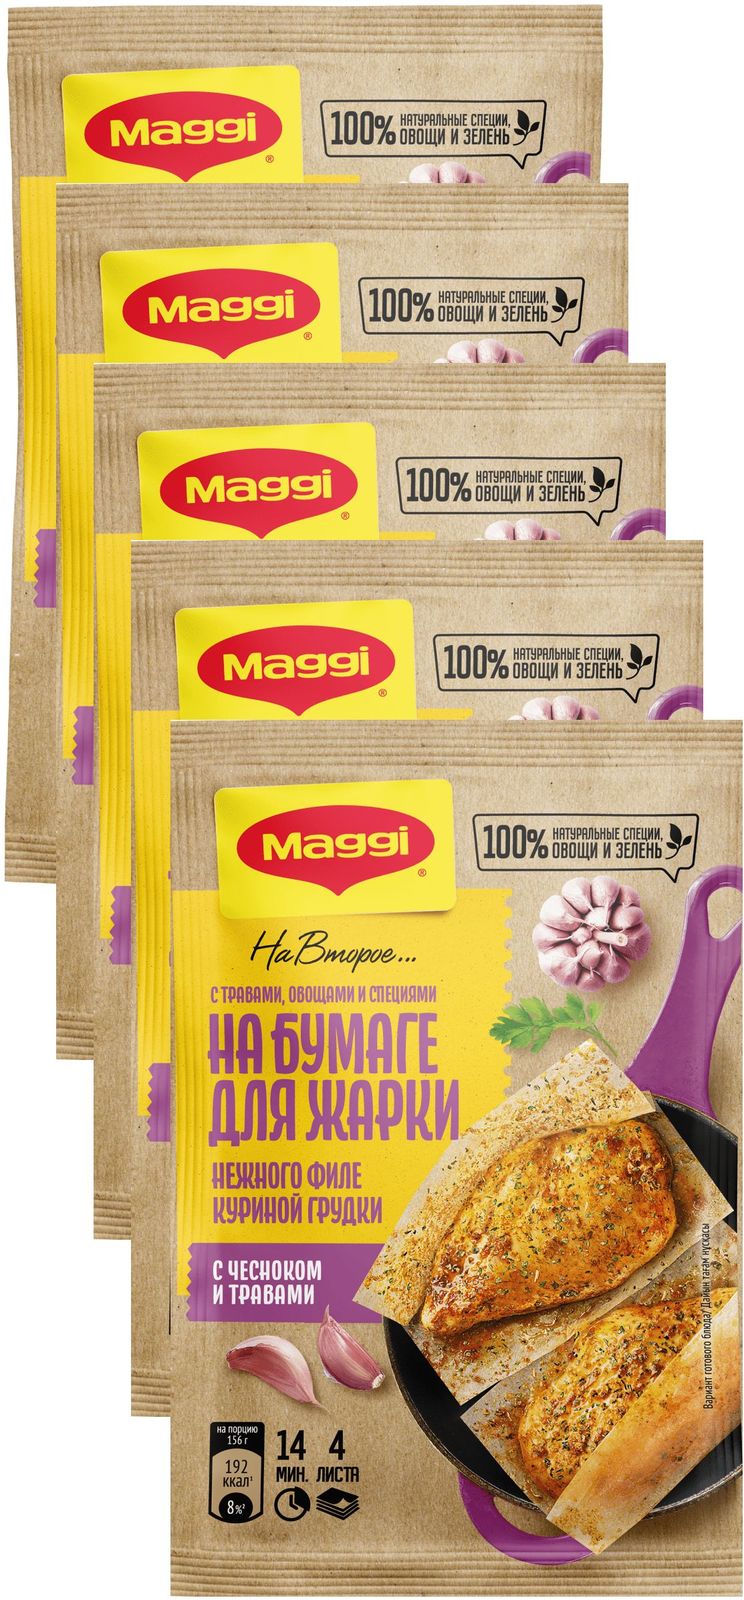 Maggi For tender chicken breast with garlic and herbs x 5 pieces - $30.00